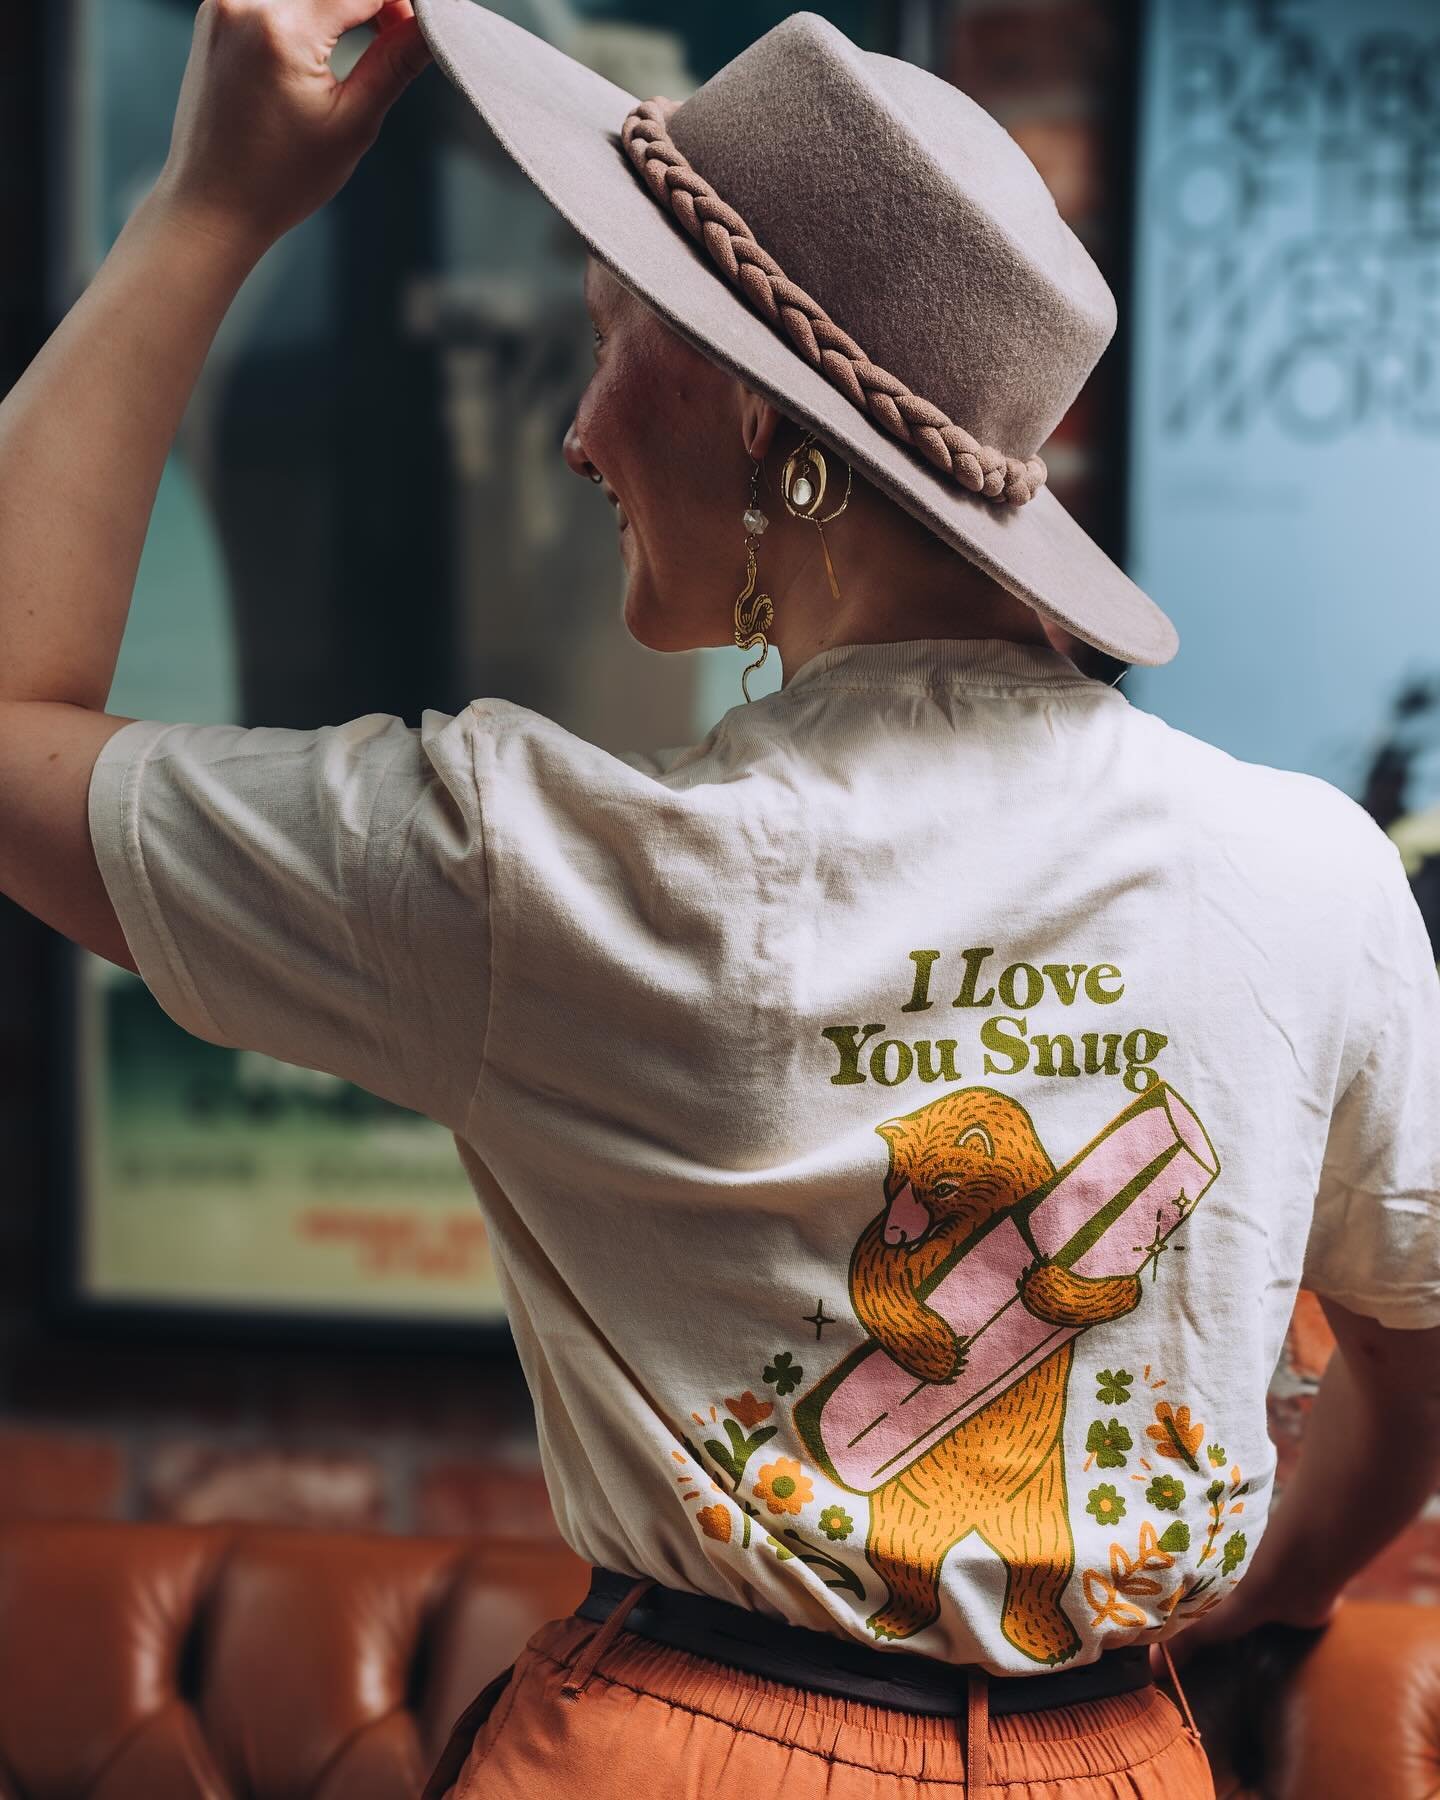 ✨ 5 years under the sun ☀️
Snug 5 year anniversary tees! Available in cream and black, designed by @lilytherens 🫶
Ask your bartender or server for one in hour size! Only available in person. 

📸 @anna_wick 
#cocktailbar #craftcocktails #aacramento